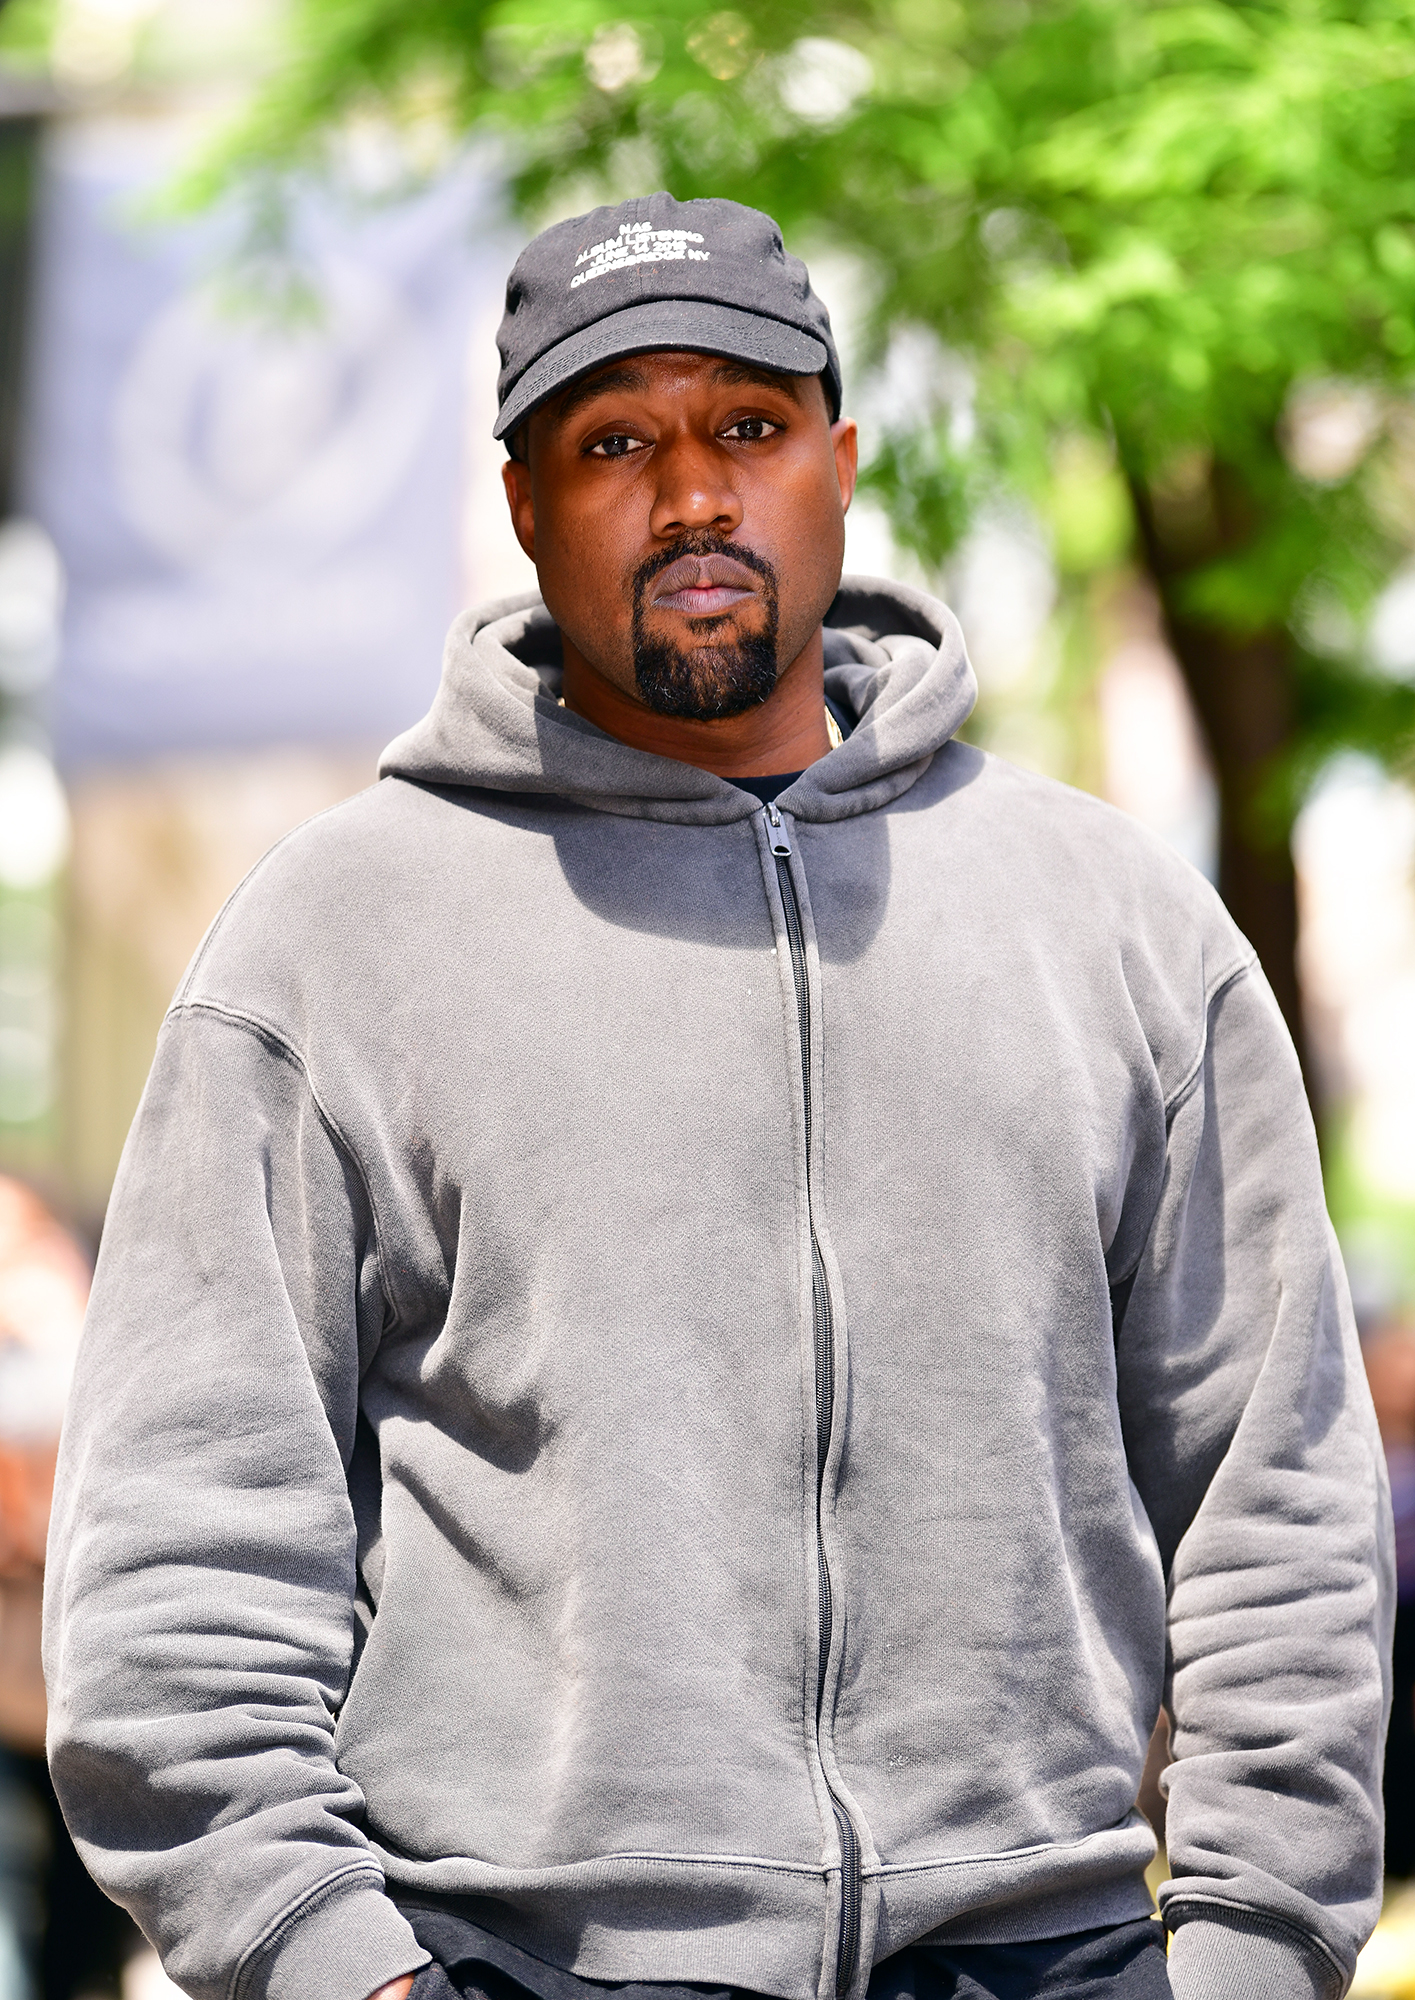 Pron Xxxxxx Hd Video Girl - Kanye West: 'I Still Look at Pornhub' After Having Daughters